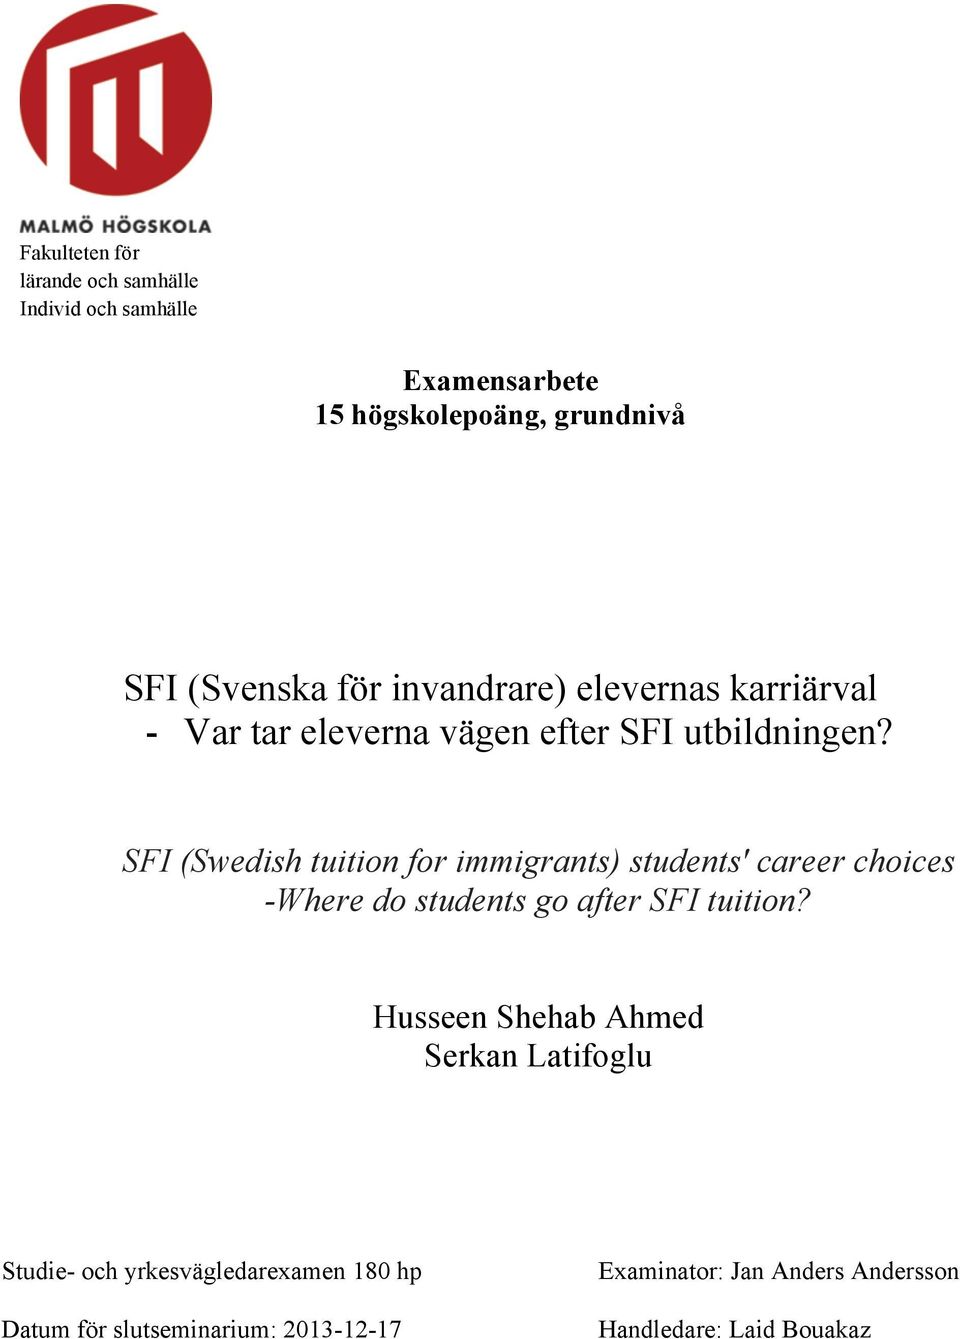 SFI (Swedish tuition for immigrants) students' career choices -Where do students go after SFI tuition?